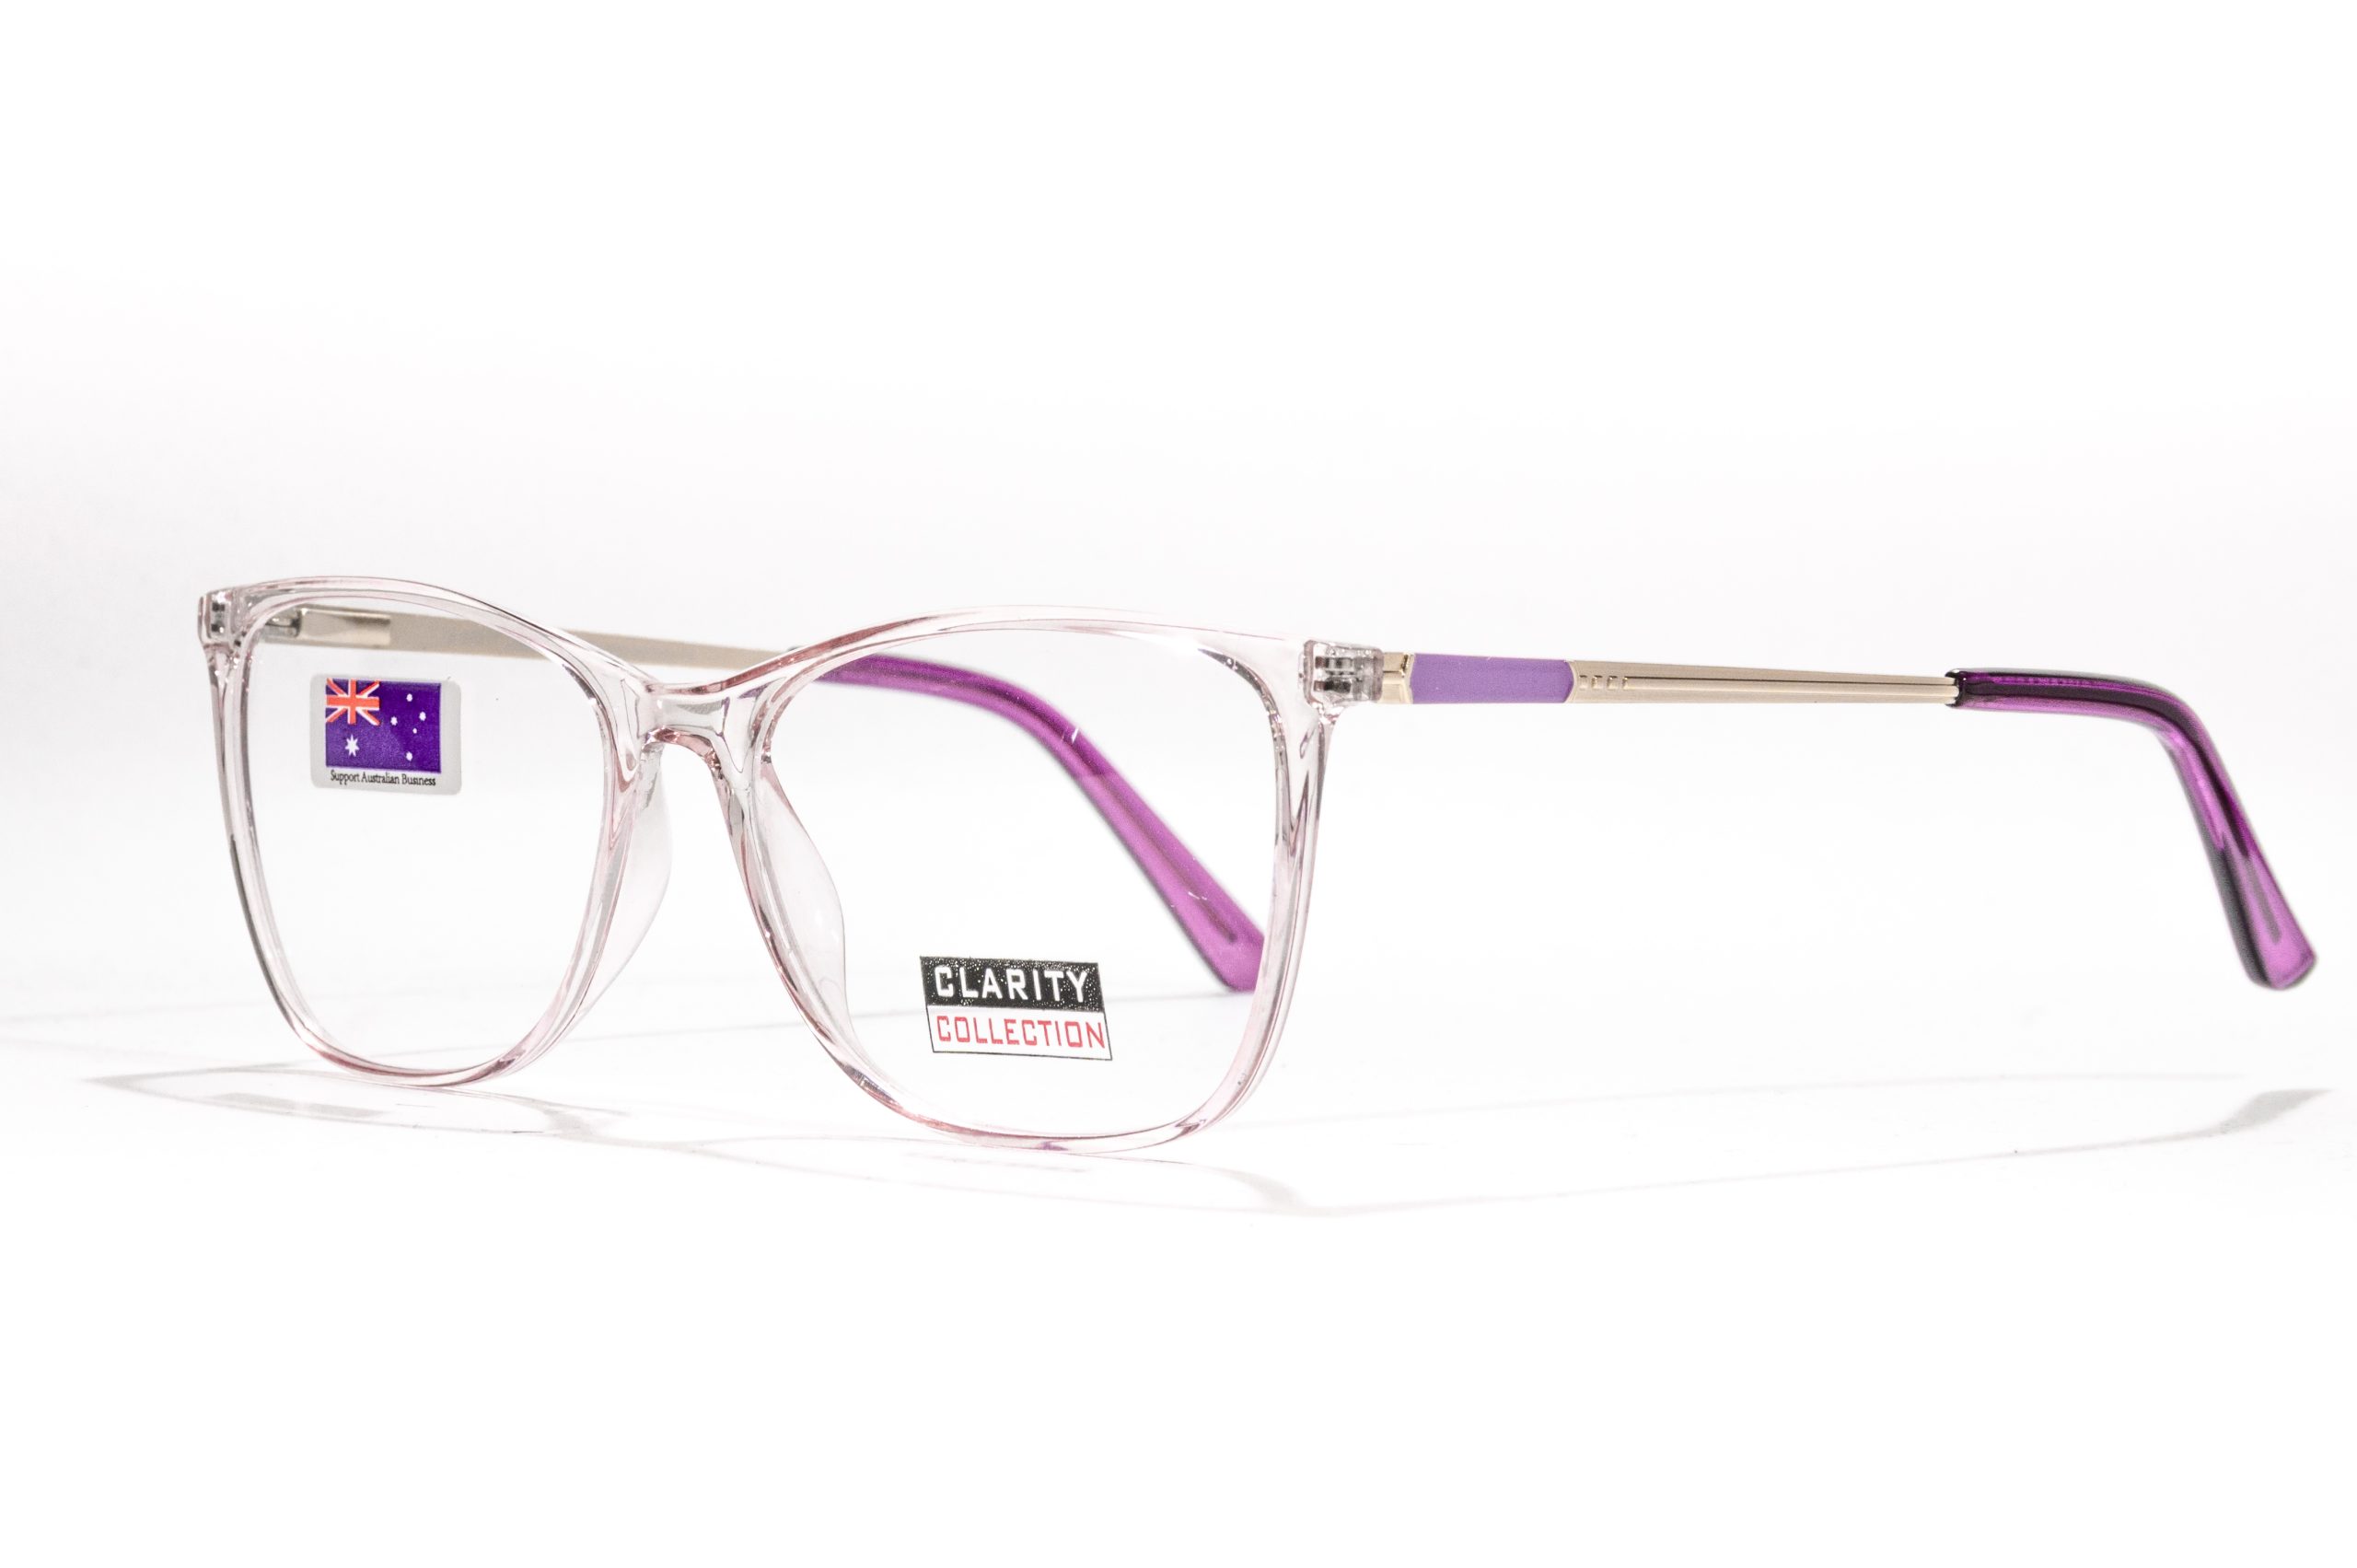 Crystal front with lilac and pewter temples